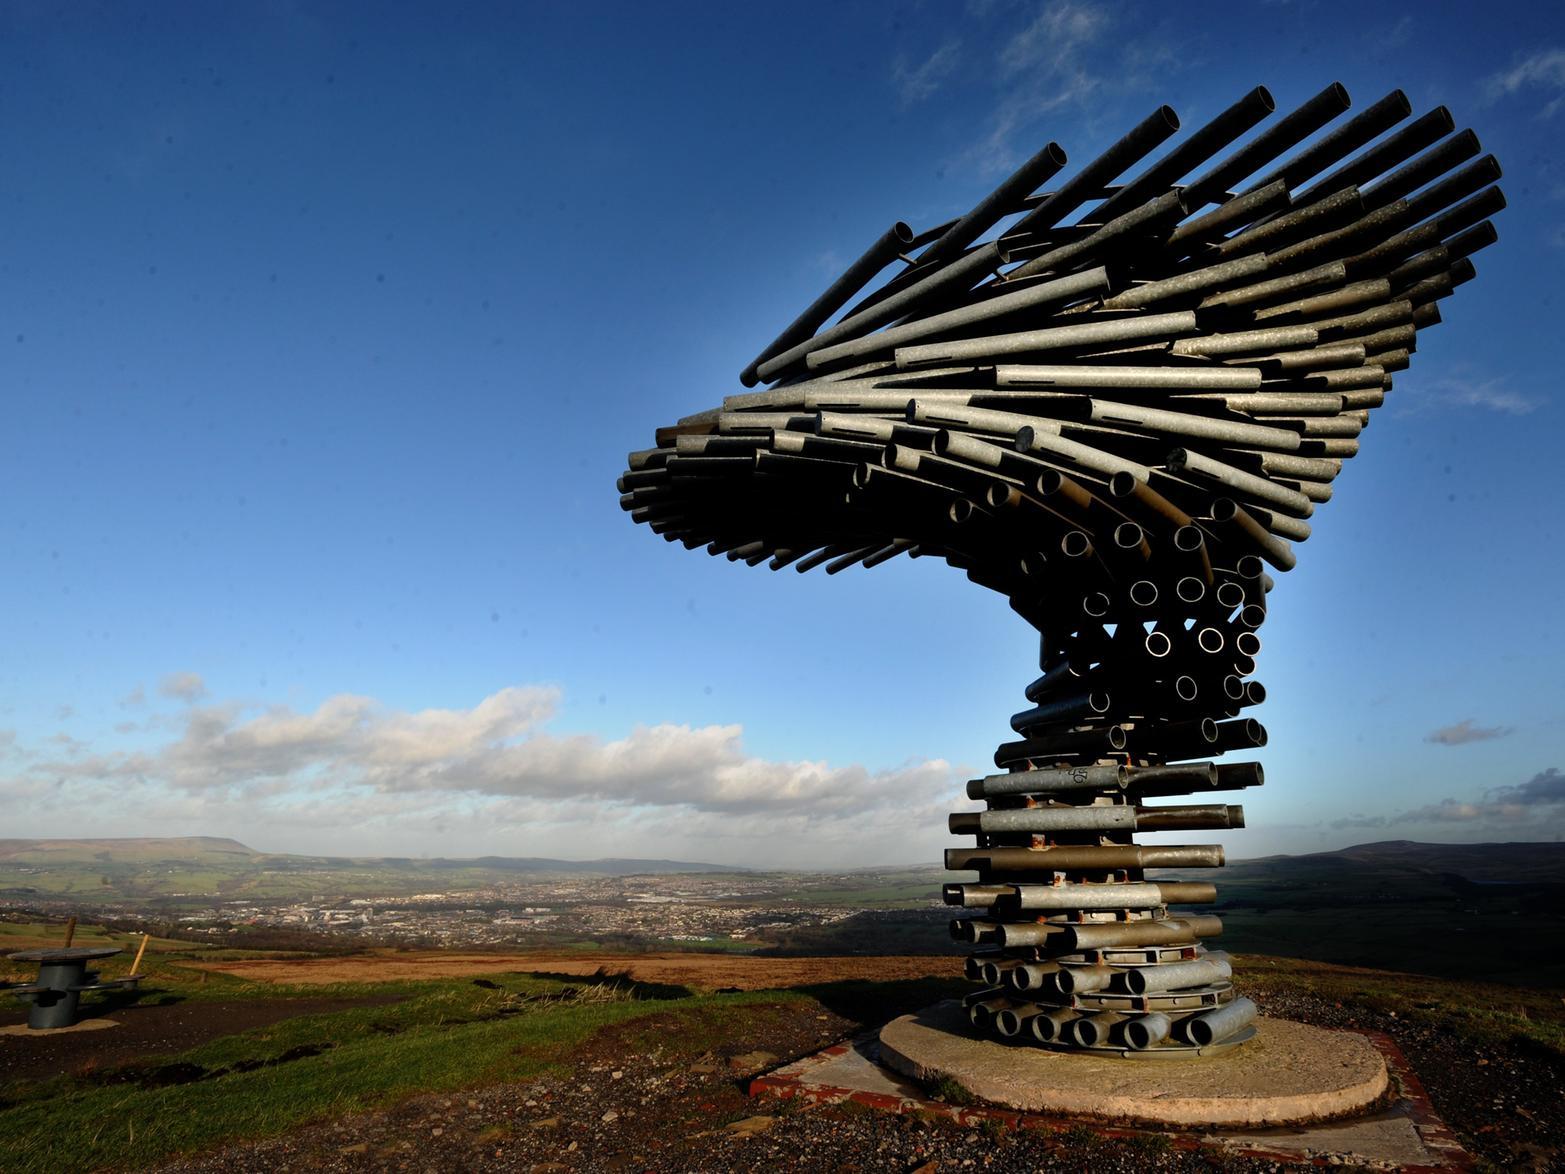 The Wayside Arts Trail leads up to Burnleys Panopticon, Singing Ringing Tree, at Crown Point. This route gives two walks of eight and three miles.